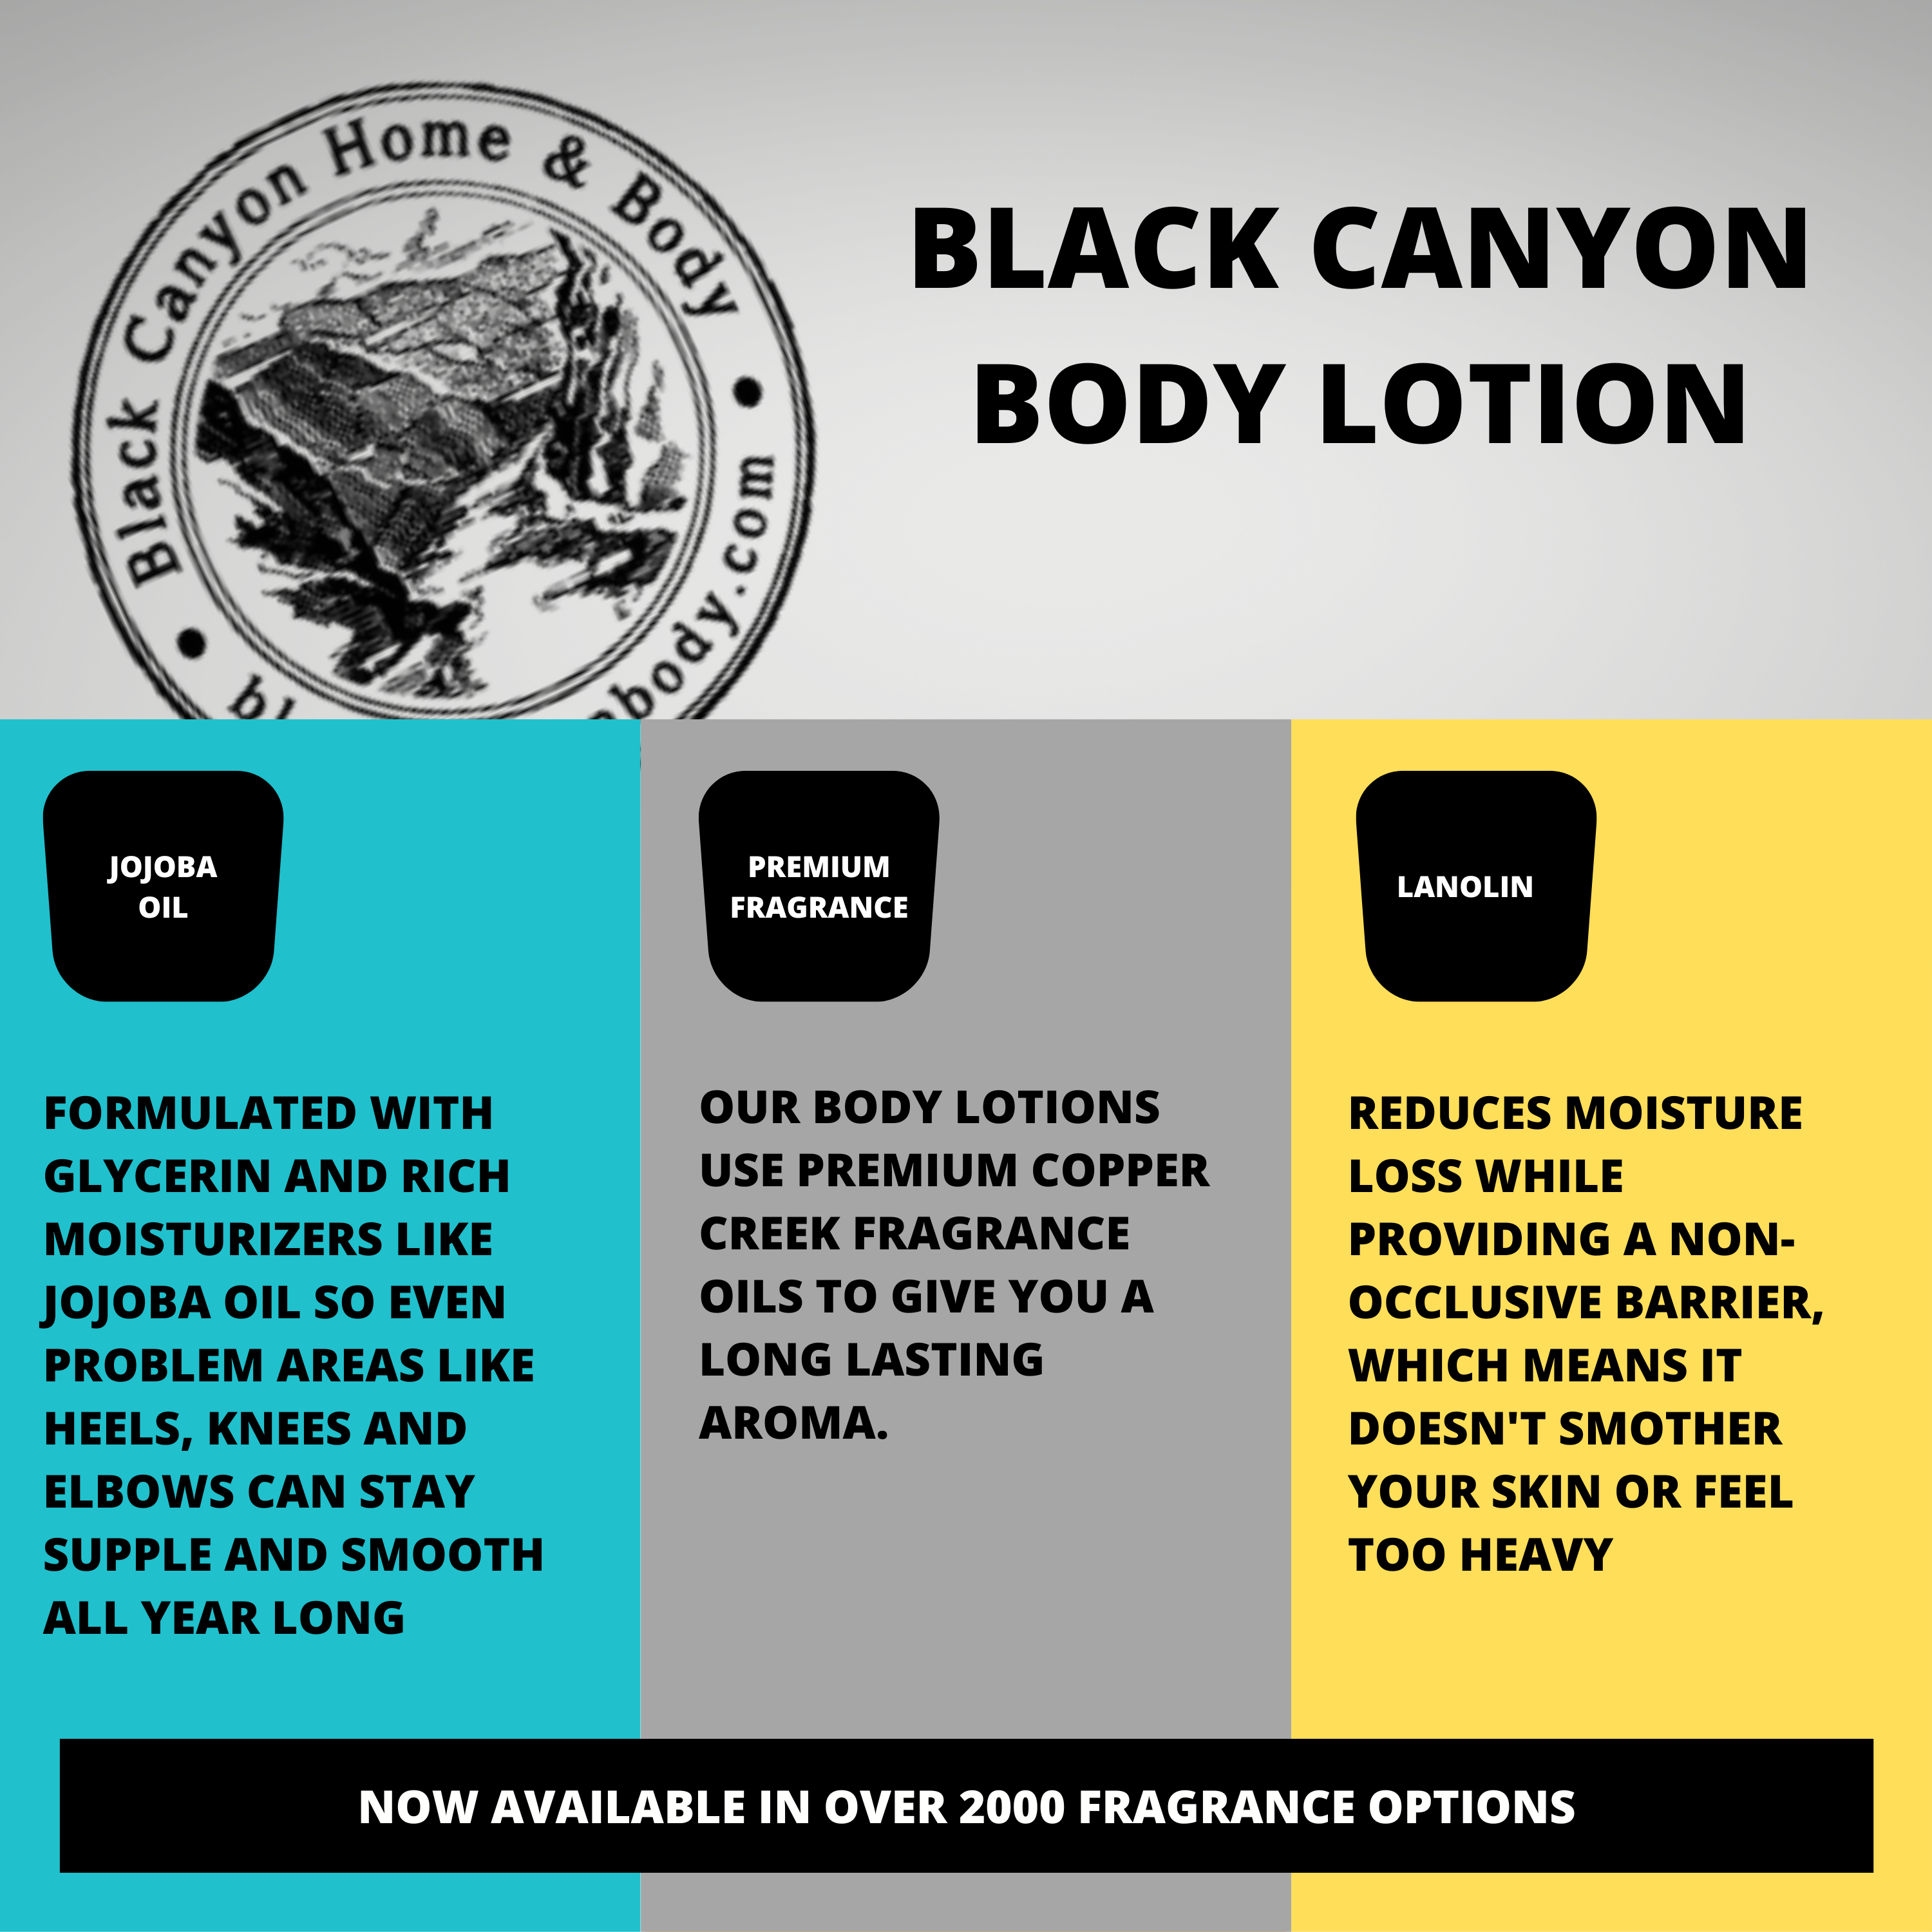 Black Canyon Black Currant & Rose Scented Luxury Body Lotion with Lanolin and Jojoba Oil